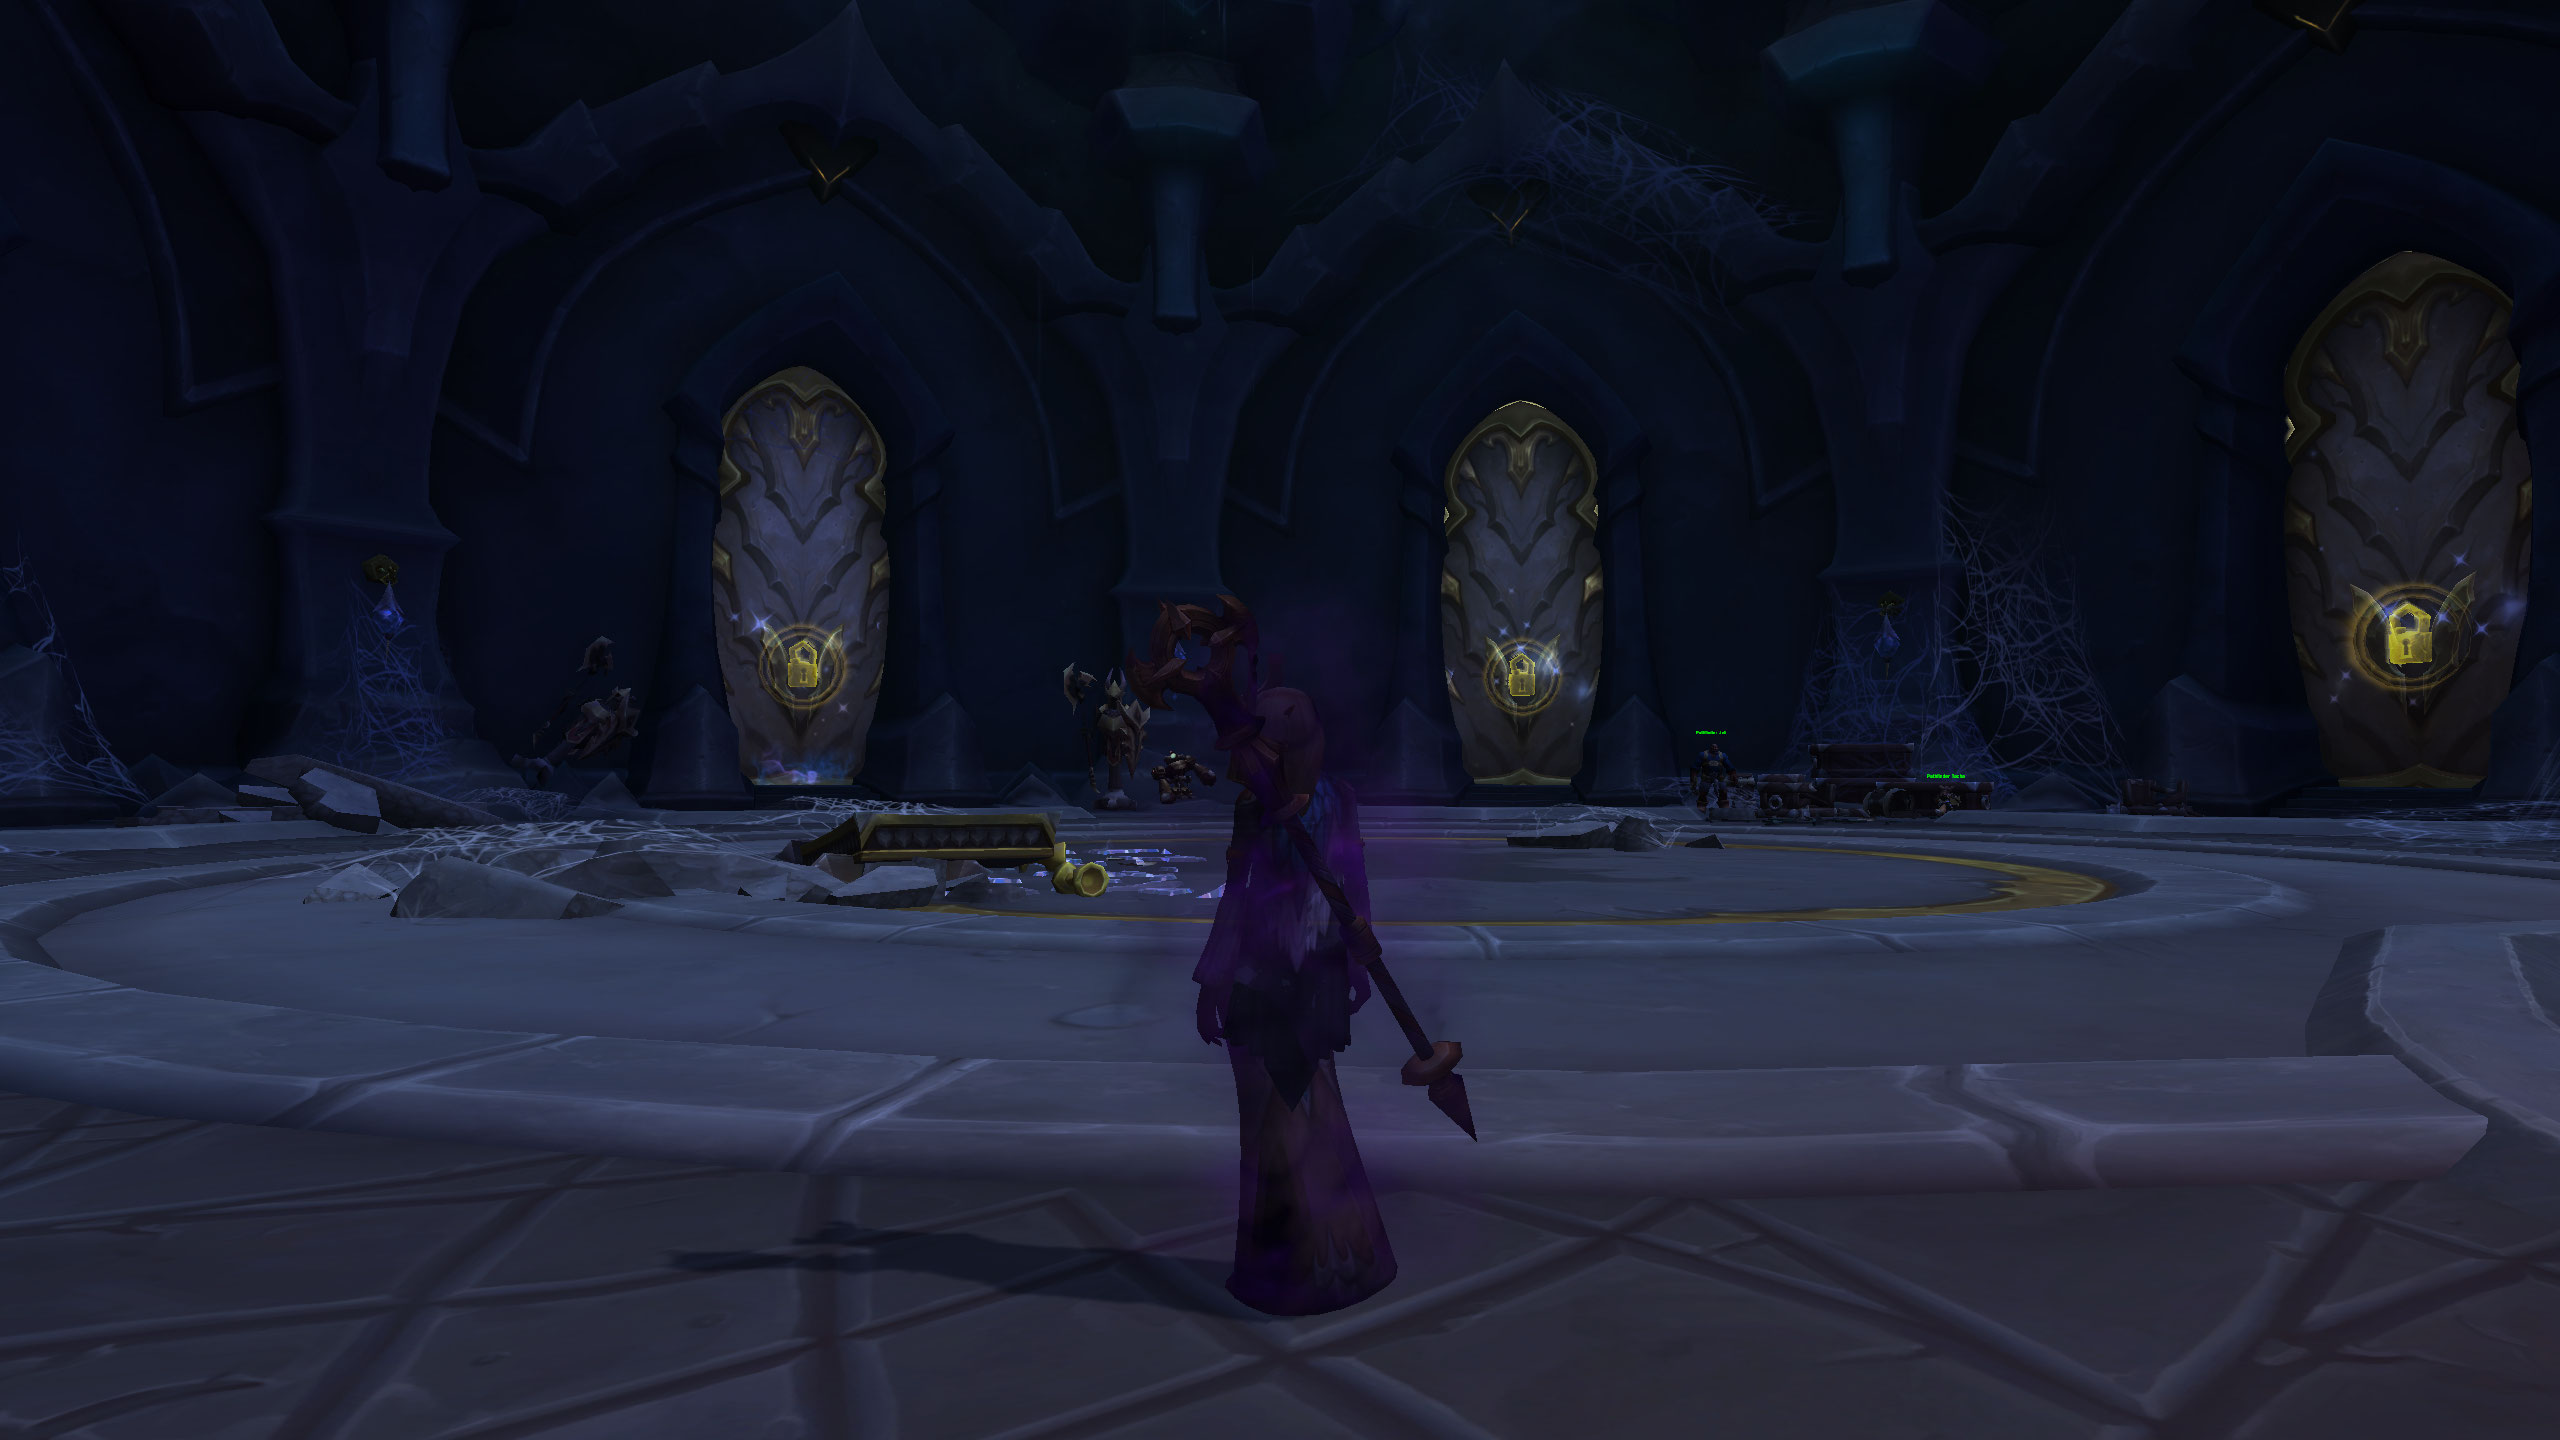 WoW Bronze Dust - a shadow priest stands inside the main room of the Zskera Vault